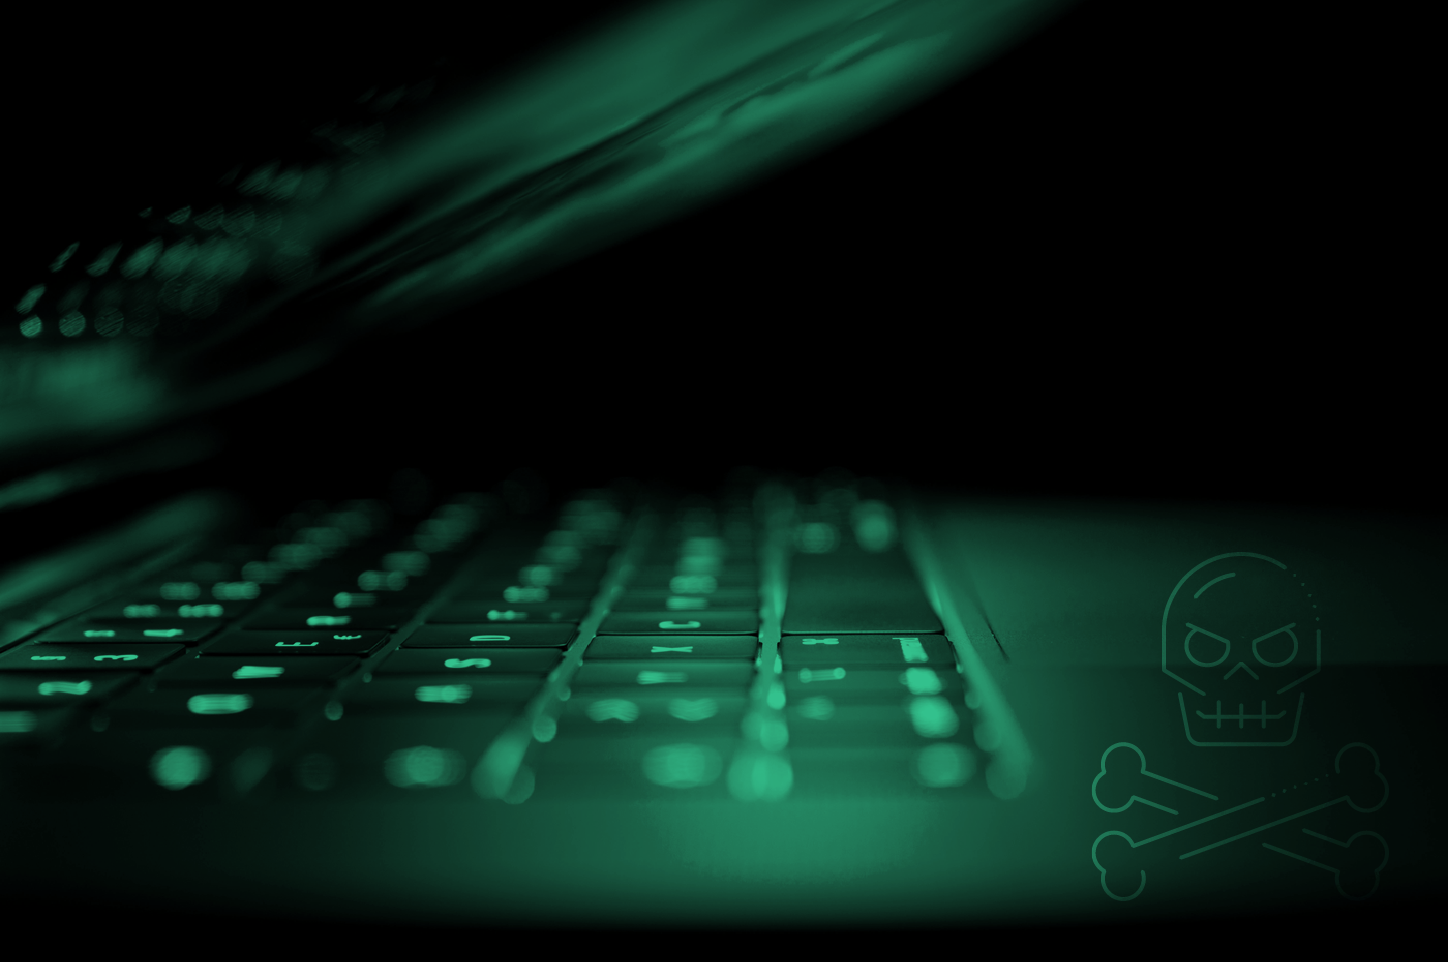 Keyboard with Dark Green Light and a skull